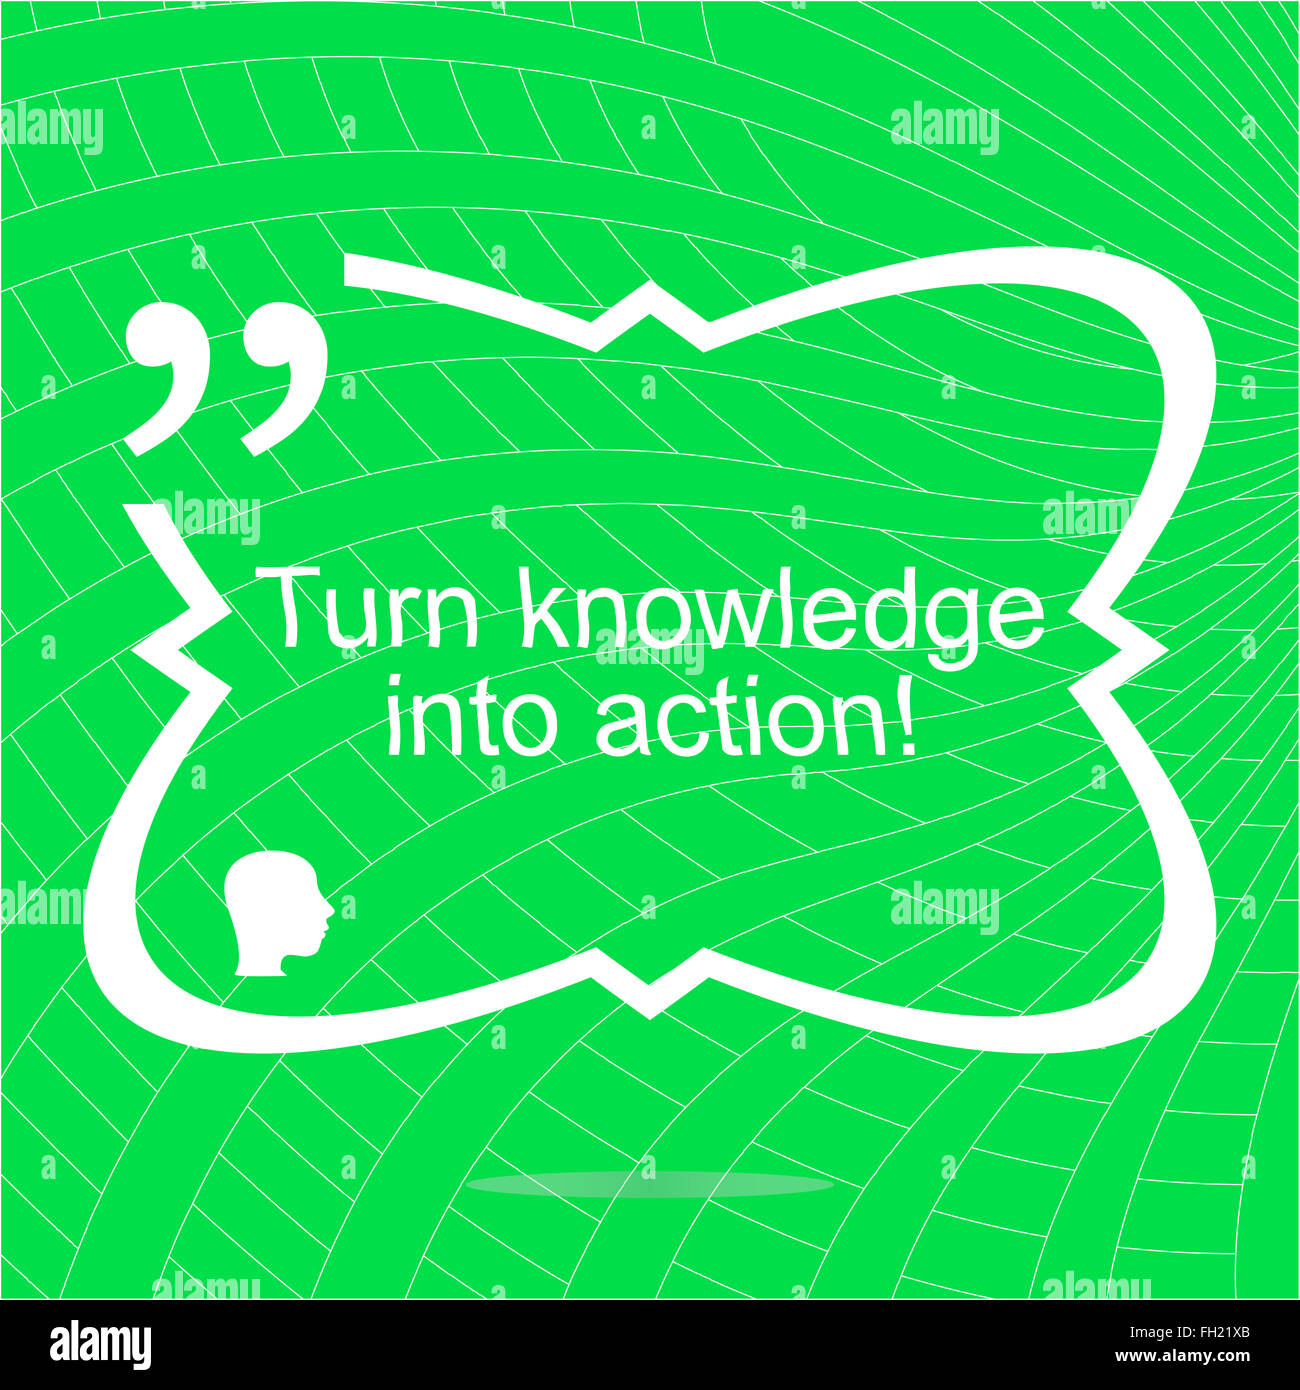 Turn knowledge into action. Inspirational motivational quote. Simple trendy design. Positive quote Stock Photo